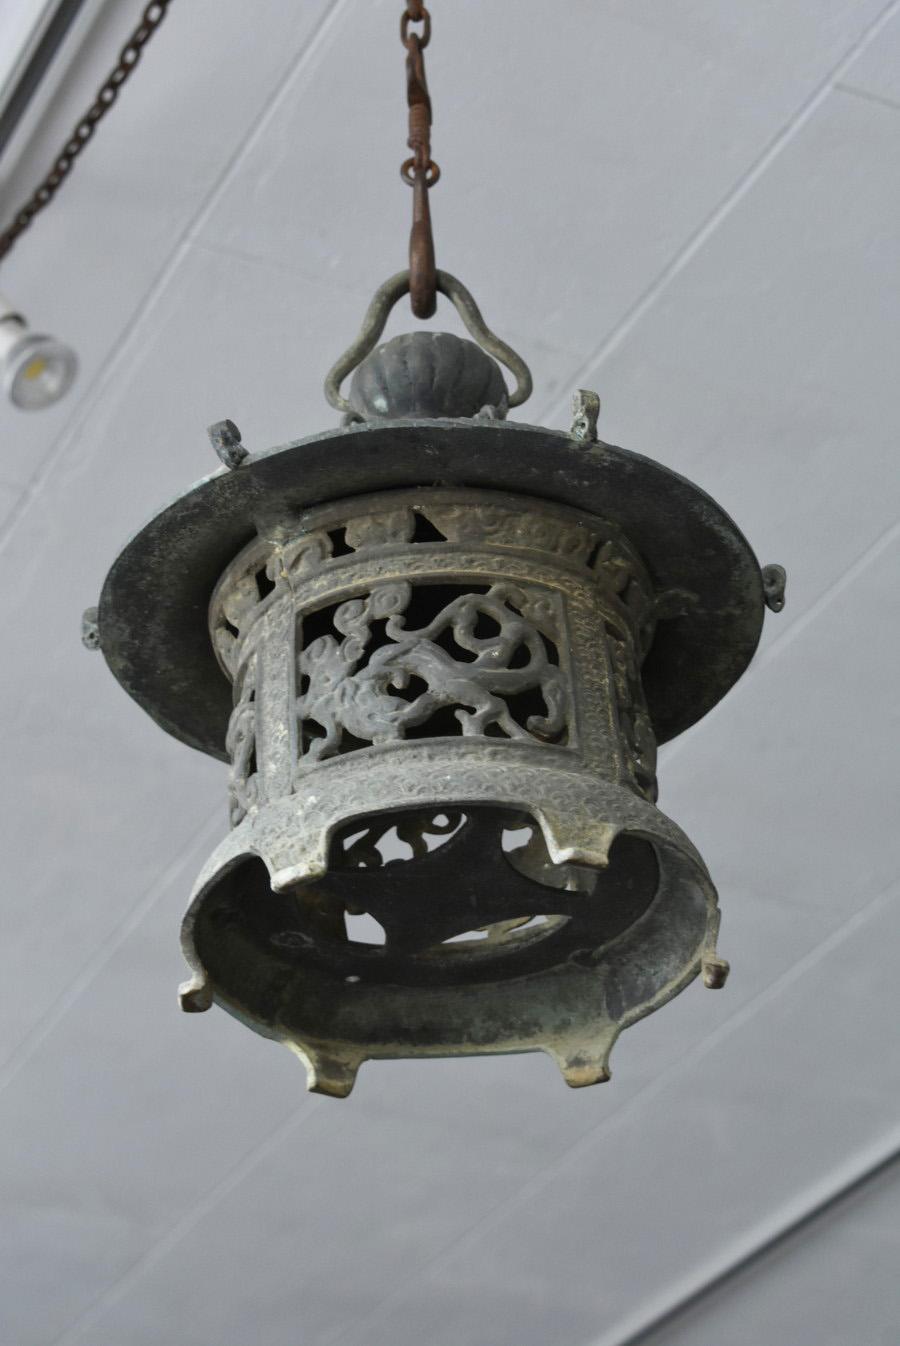 This is a bronze cast lantern made in the middle of the Showa period in Japan.
You can see that it is very finely decorated.
The dragon pattern and the geometric pattern of a semicircle are applied to the whole, which is an auspicious pattern called